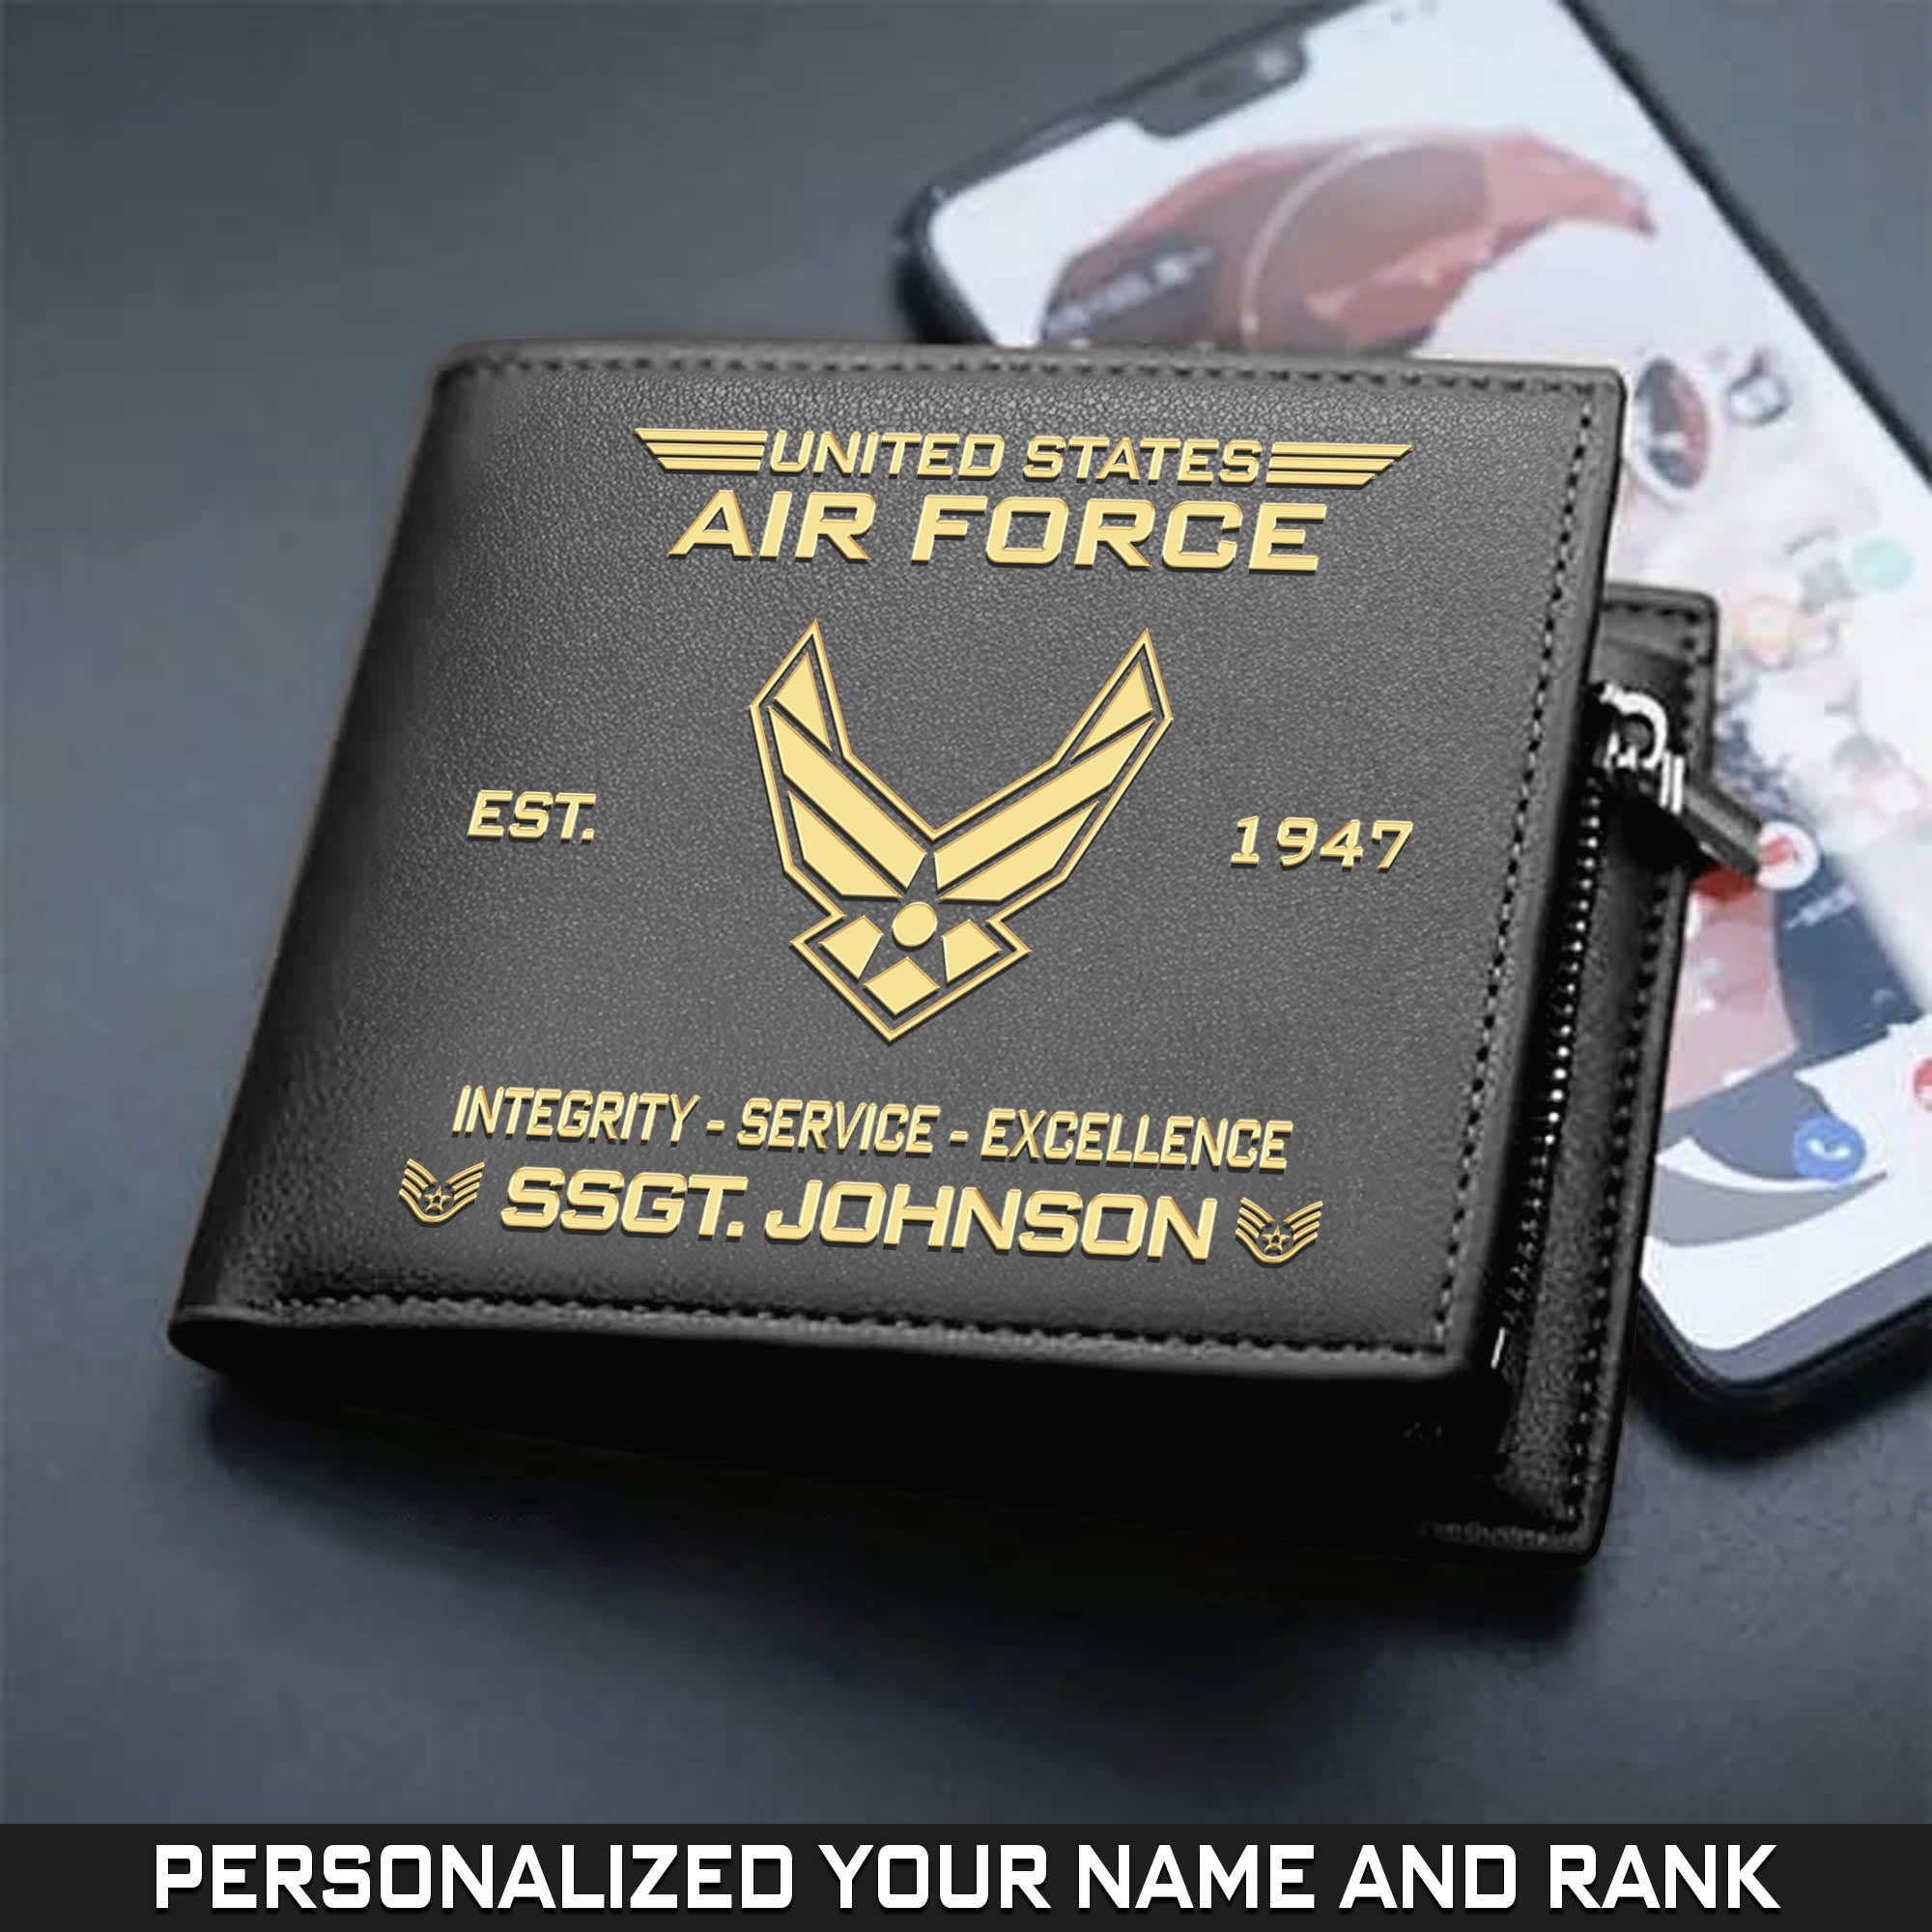 United States Air Force Wallet Air Force Integrity Service Excellence Leather Wallet Personalized Air Force Gift